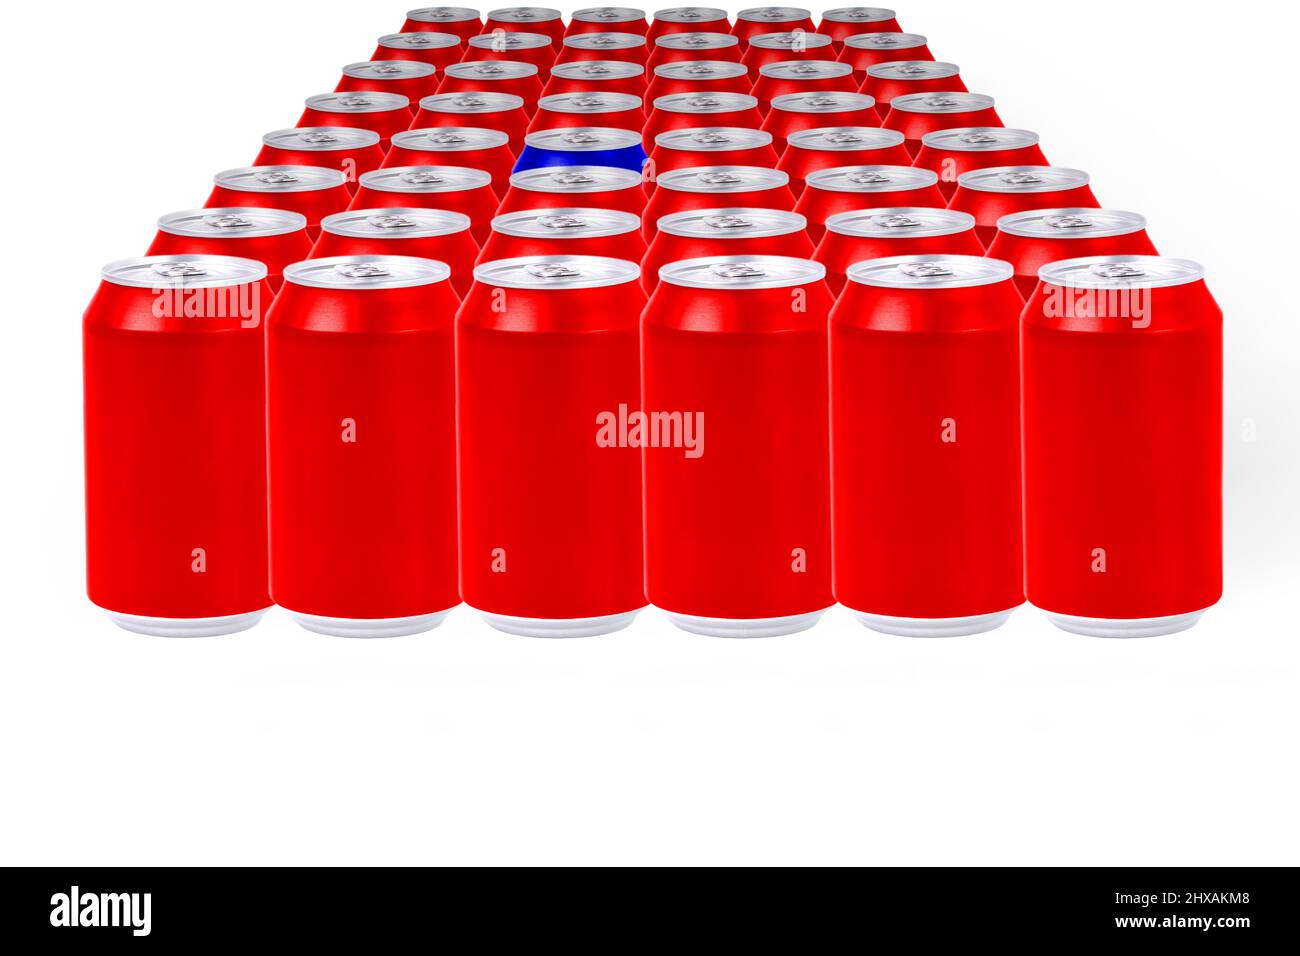 Blue aluminum can among a group of red aluminum cans on white background. Concept primary colors. Combine colors Stock Photo